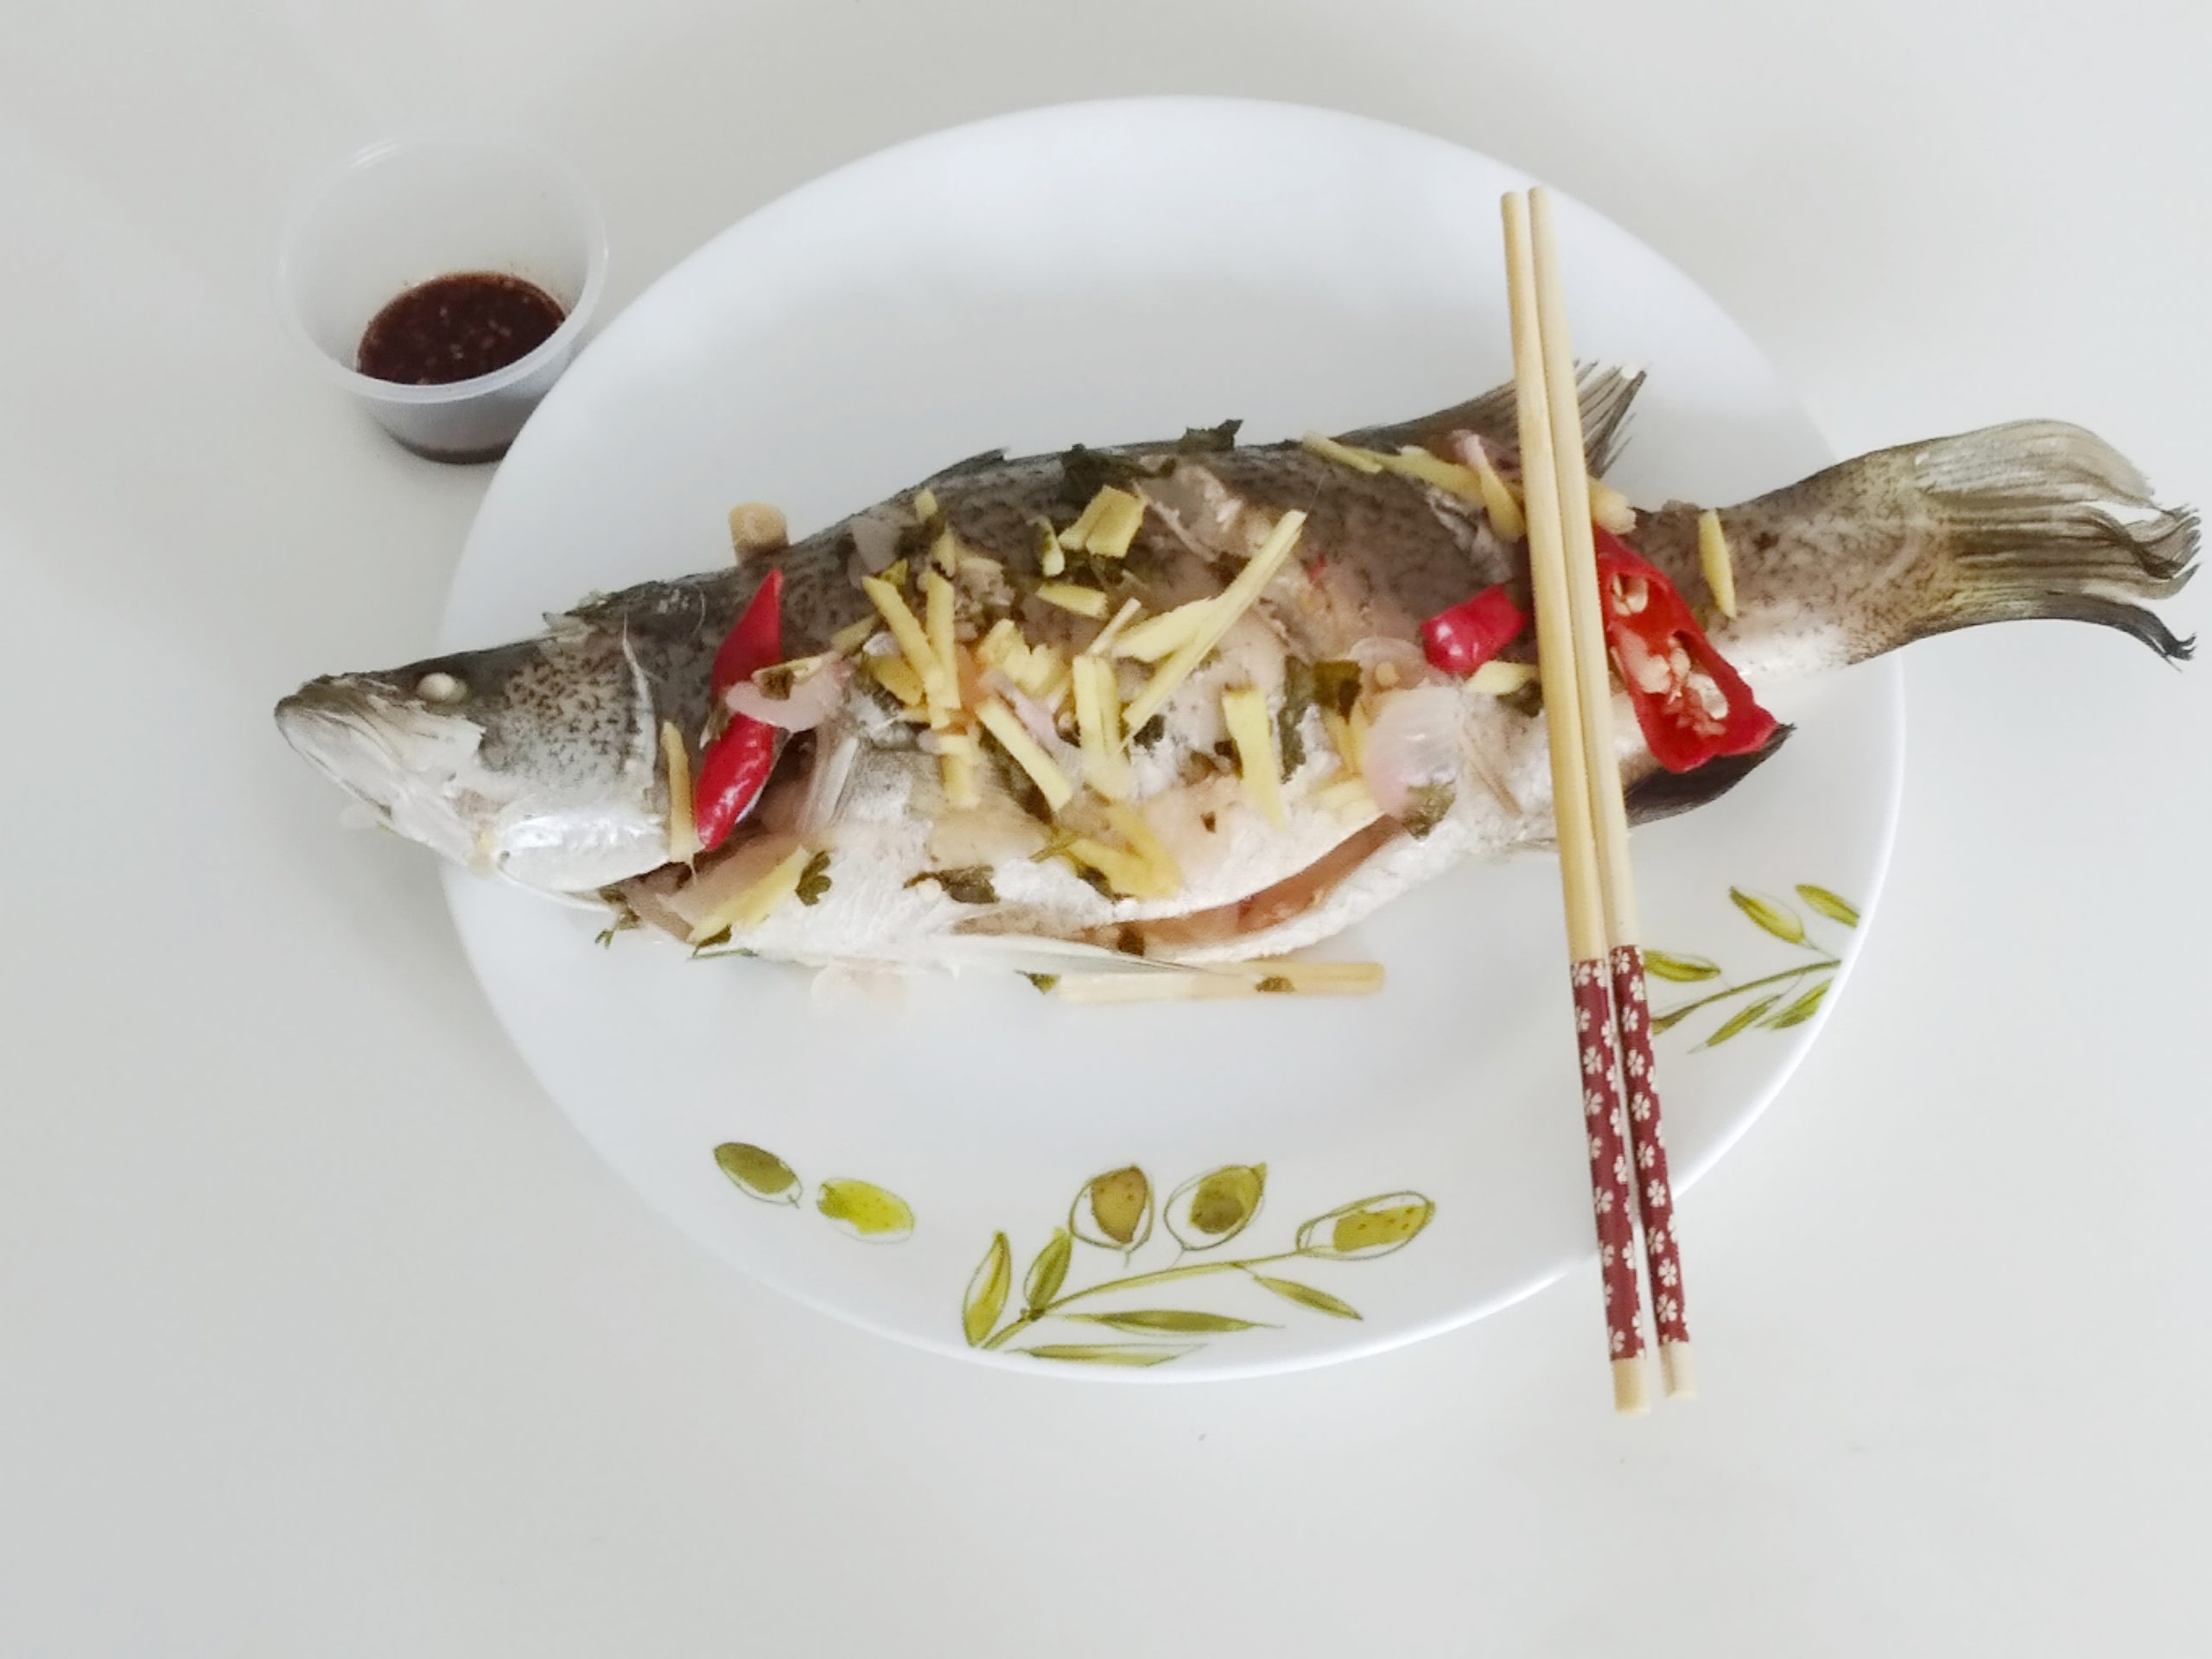 Thai steamed fish recipe with lemongrass,lime,ginger.Thai dipping sauce for steamed fish.